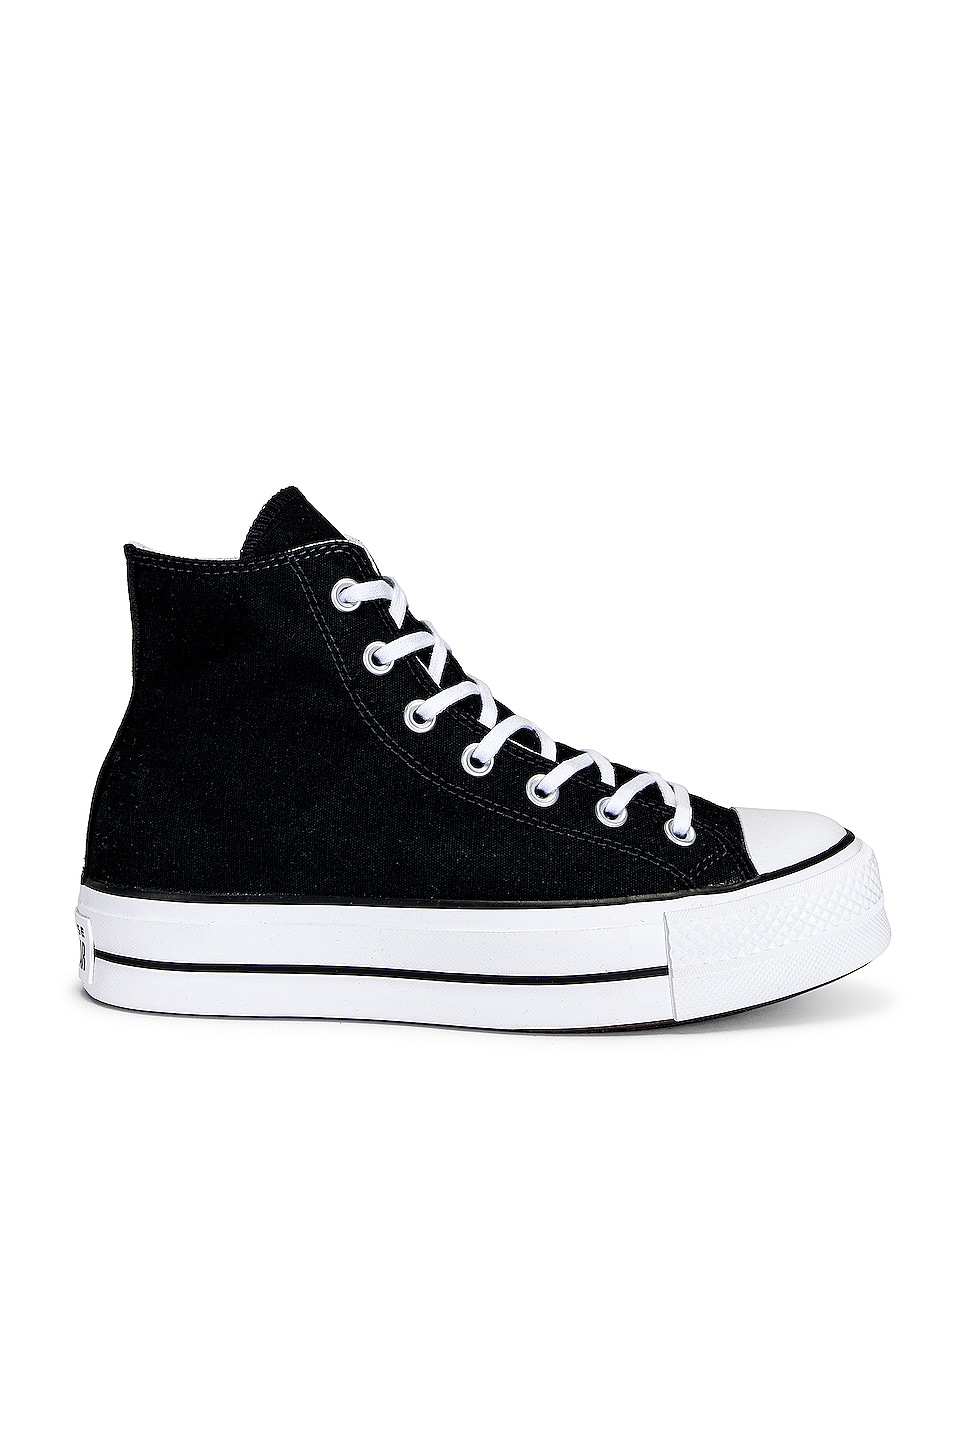 Image 1 of Converse Chuck Taylor All Star Platform Hi Tops Canvas in Black, White, White